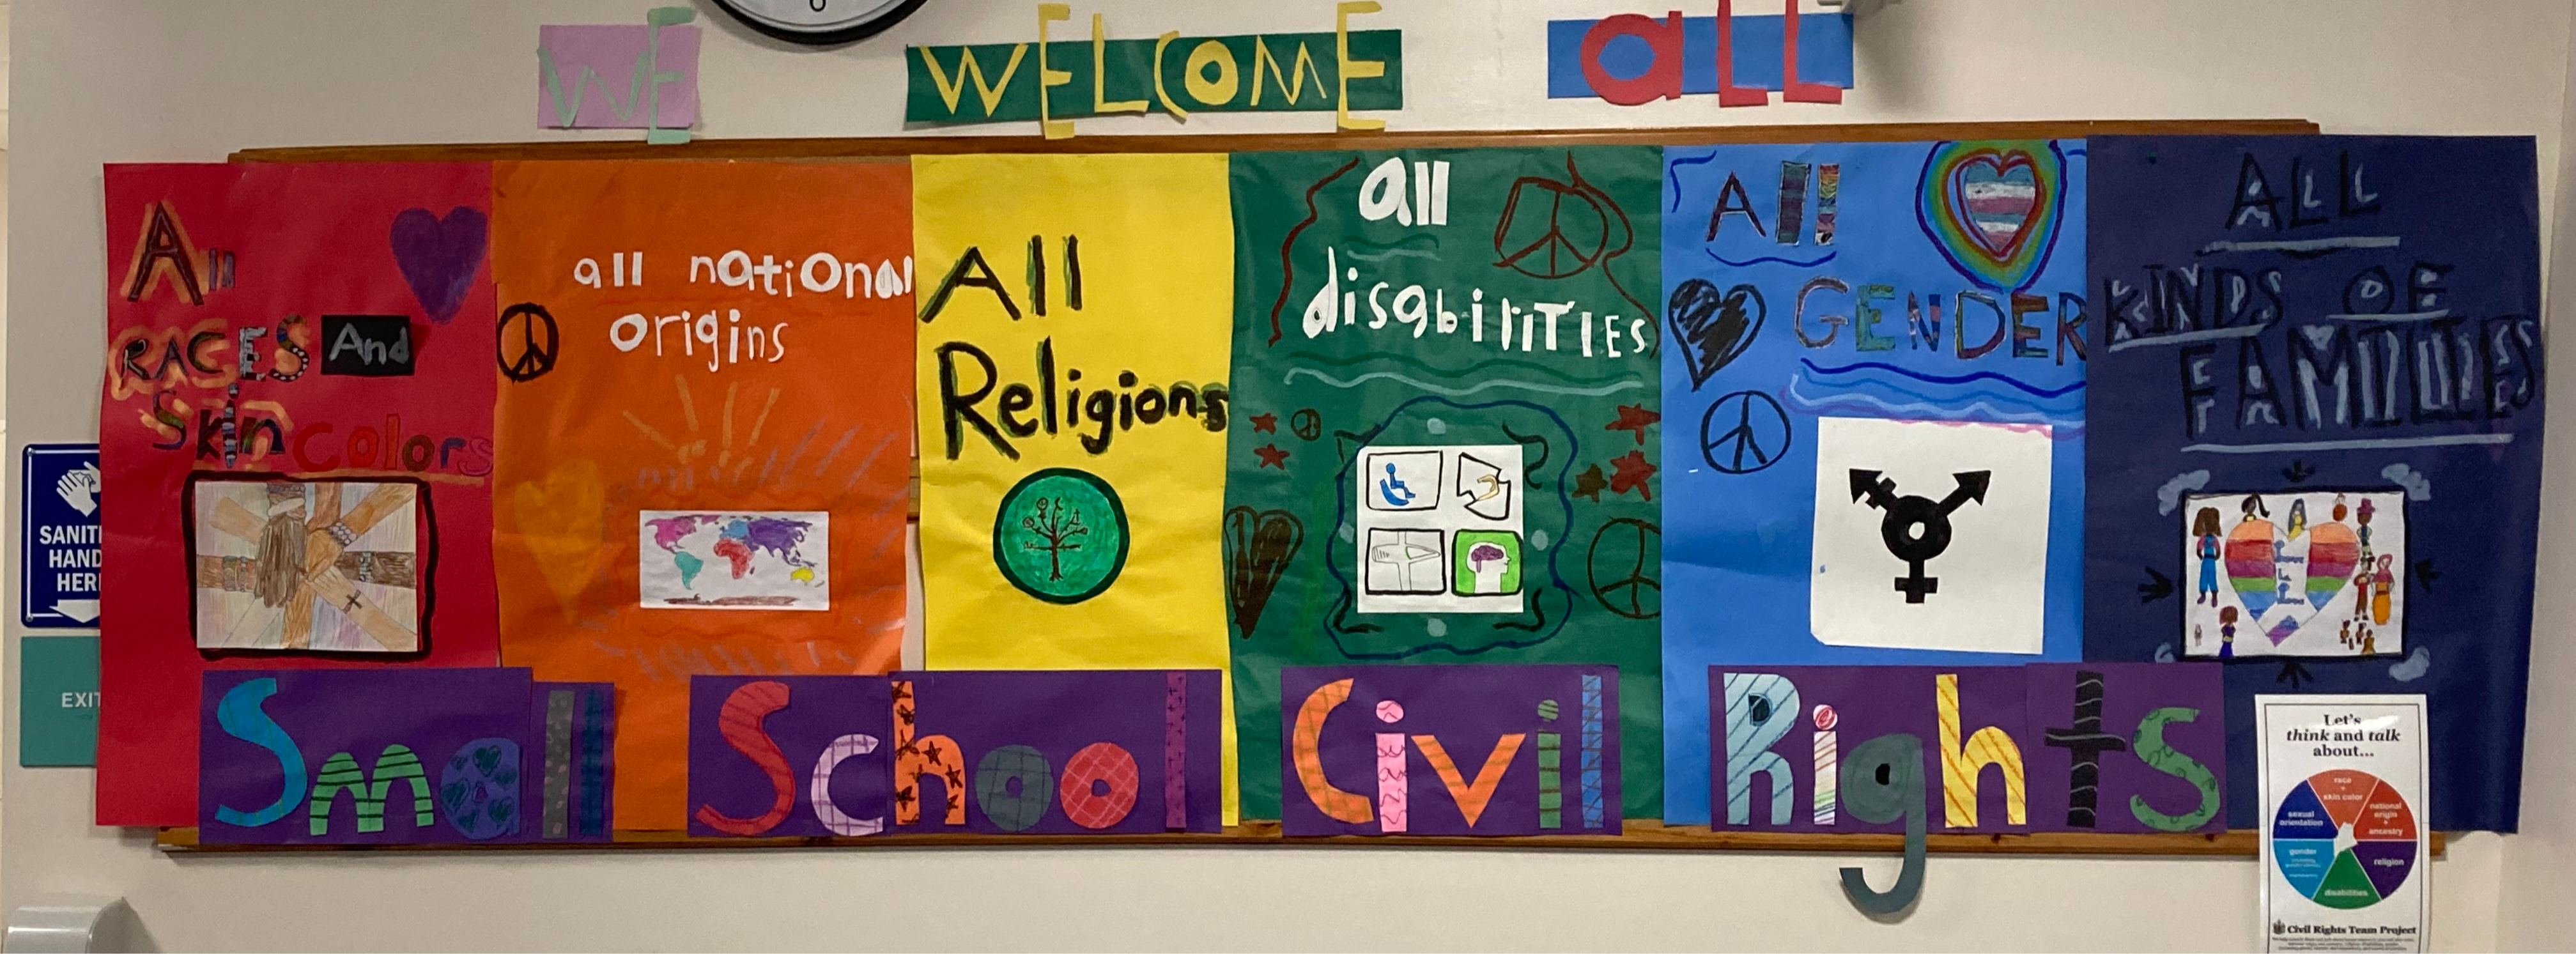 A colorful student-made banner that welcomes all races, national origins, religions, disabilities, genders and types of families